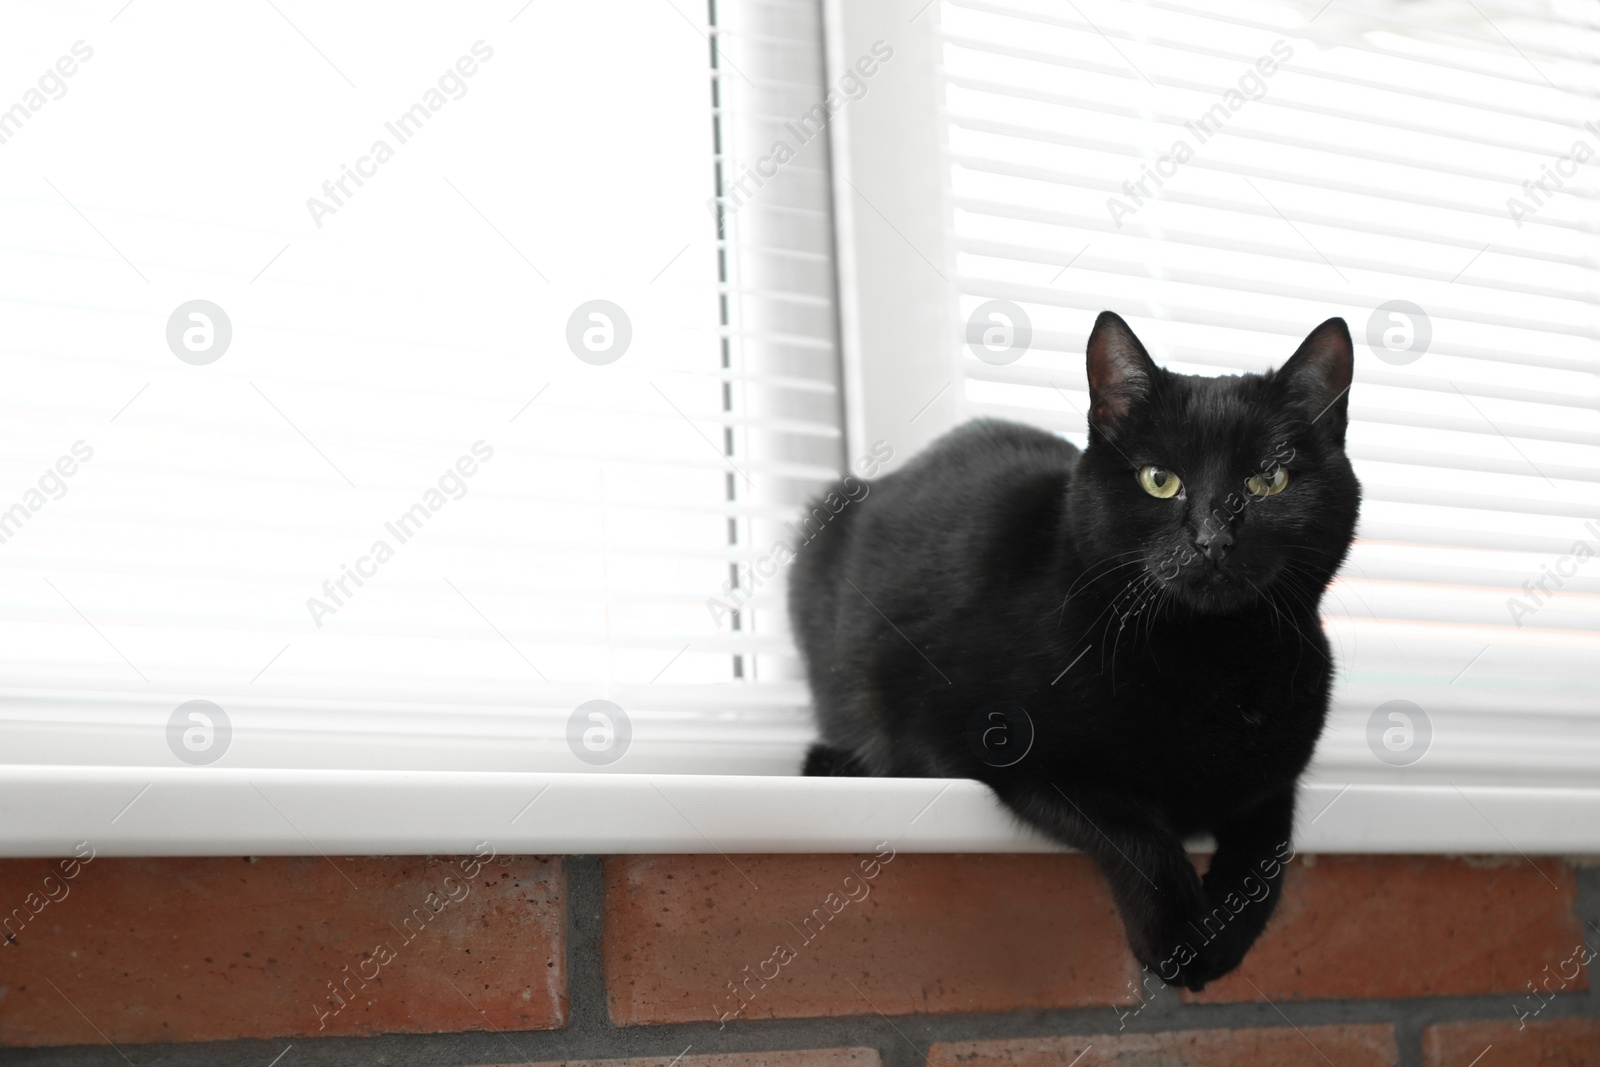 Photo of Adorable black cat near window with blinds indoors. Space for text